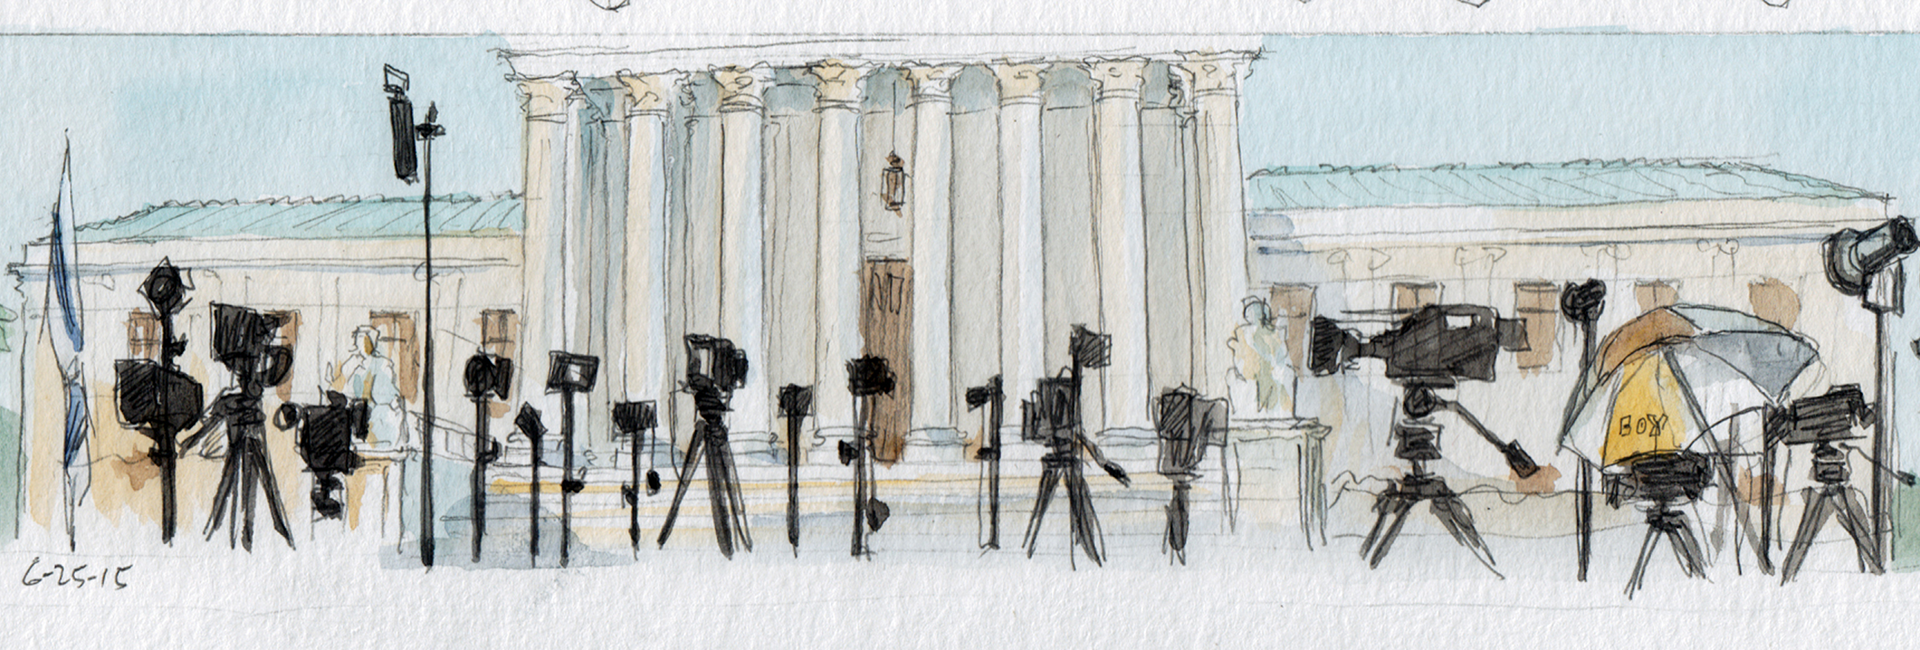 Drawing of many microphones set up outside the U.S. Supreme Court building